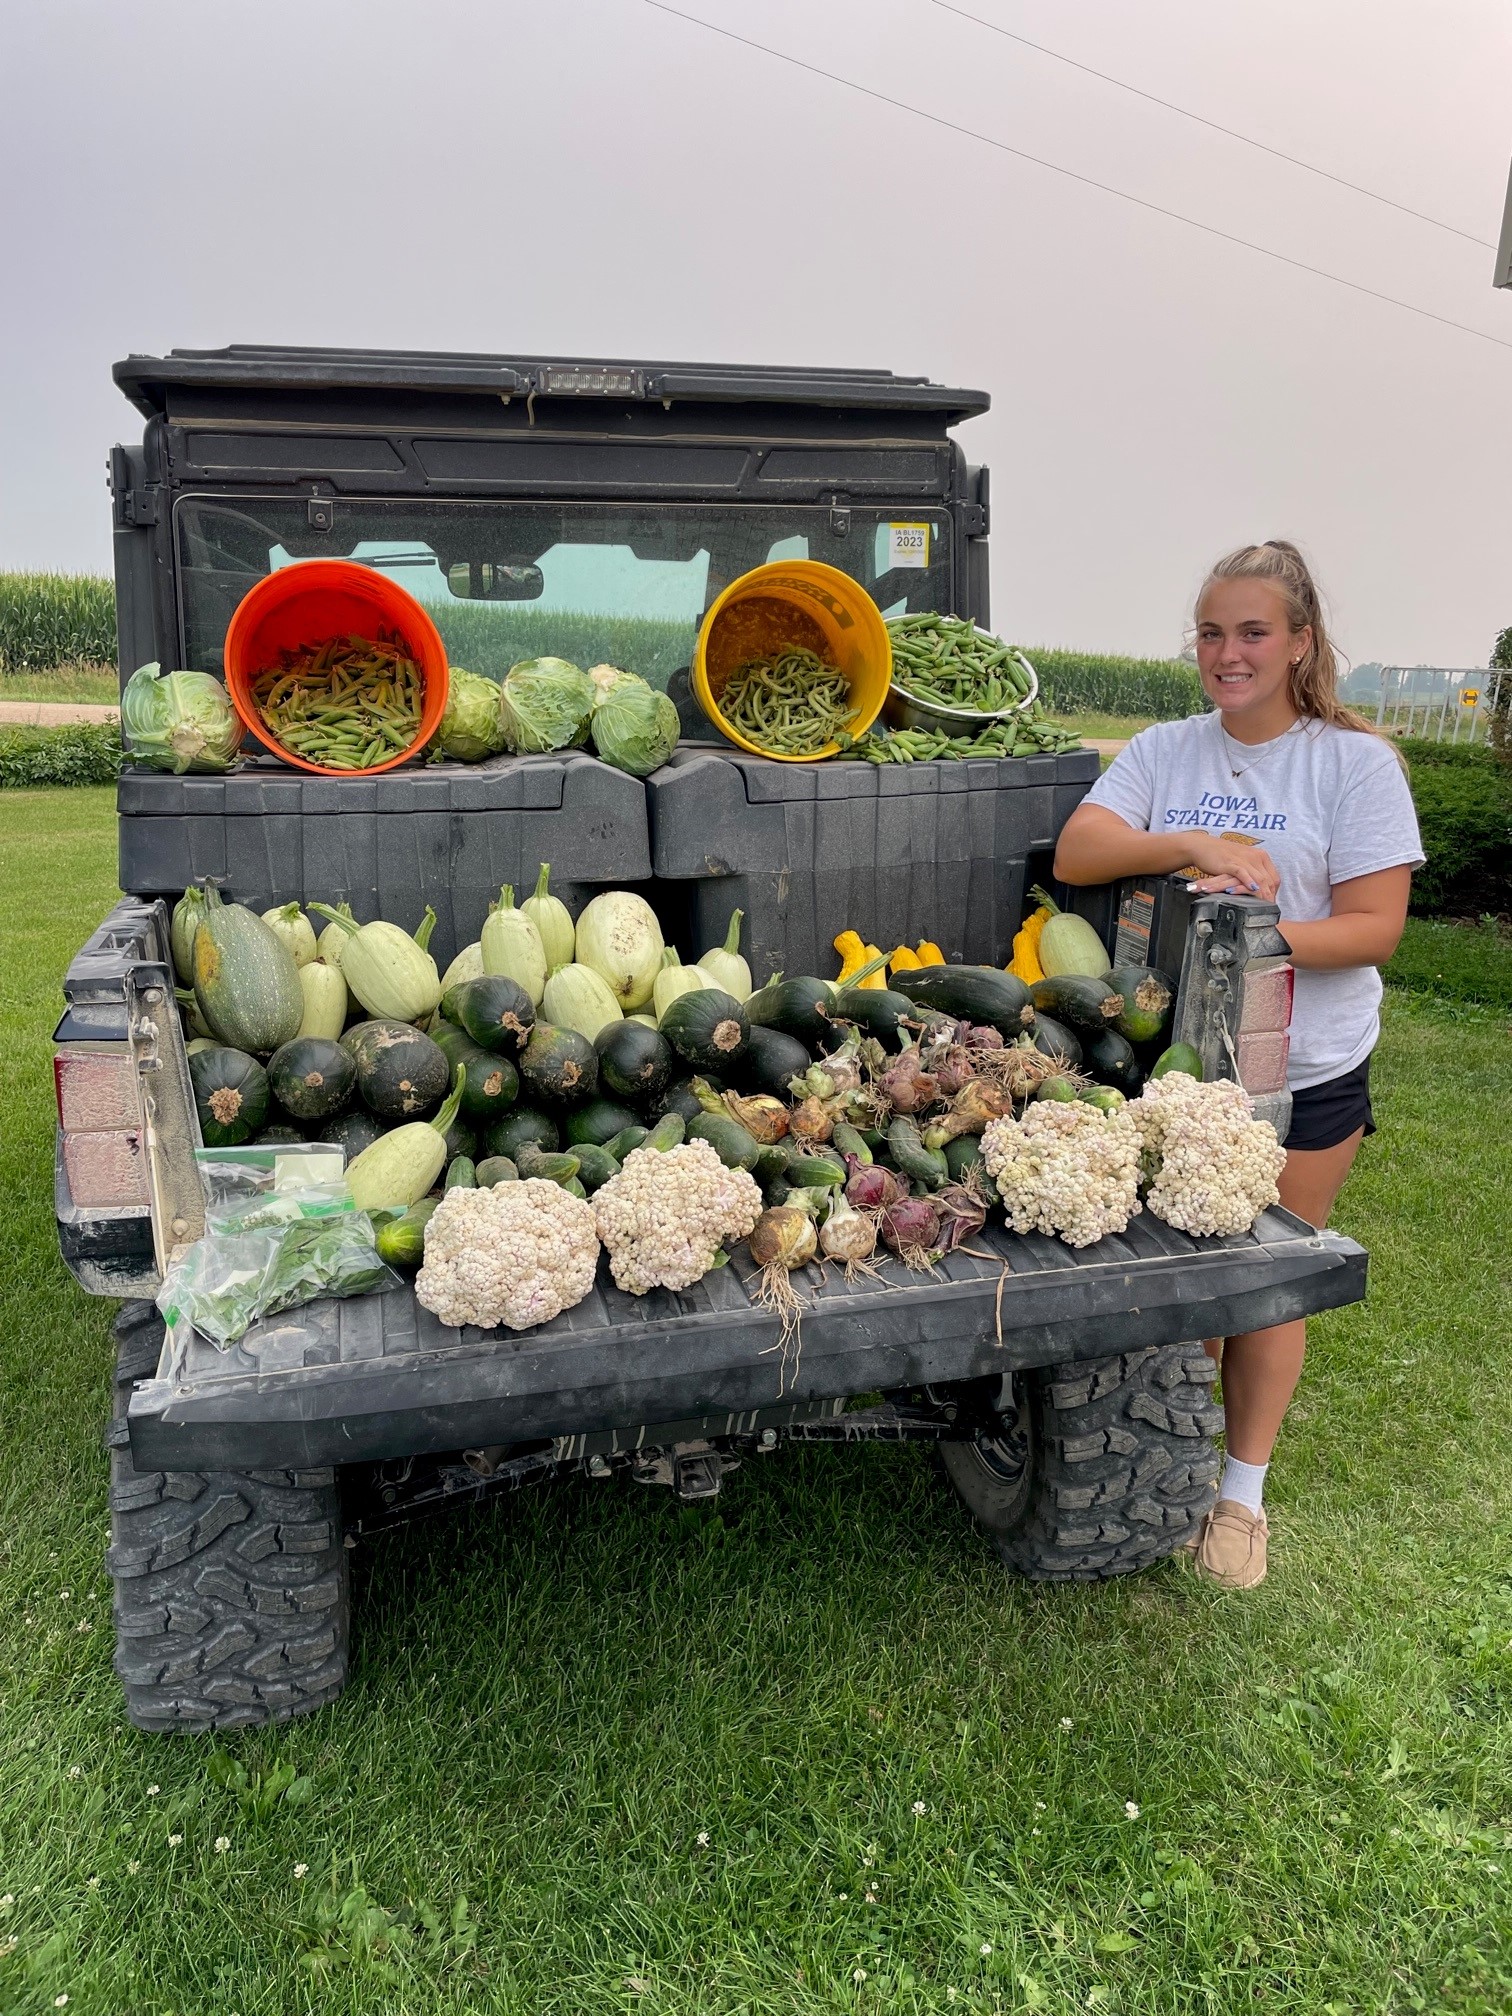 Harvesting Hope: Iowa Teen’s 7,000-pound Garden Bounty Feeds Thousands, Aims to Triple Impact by 2025